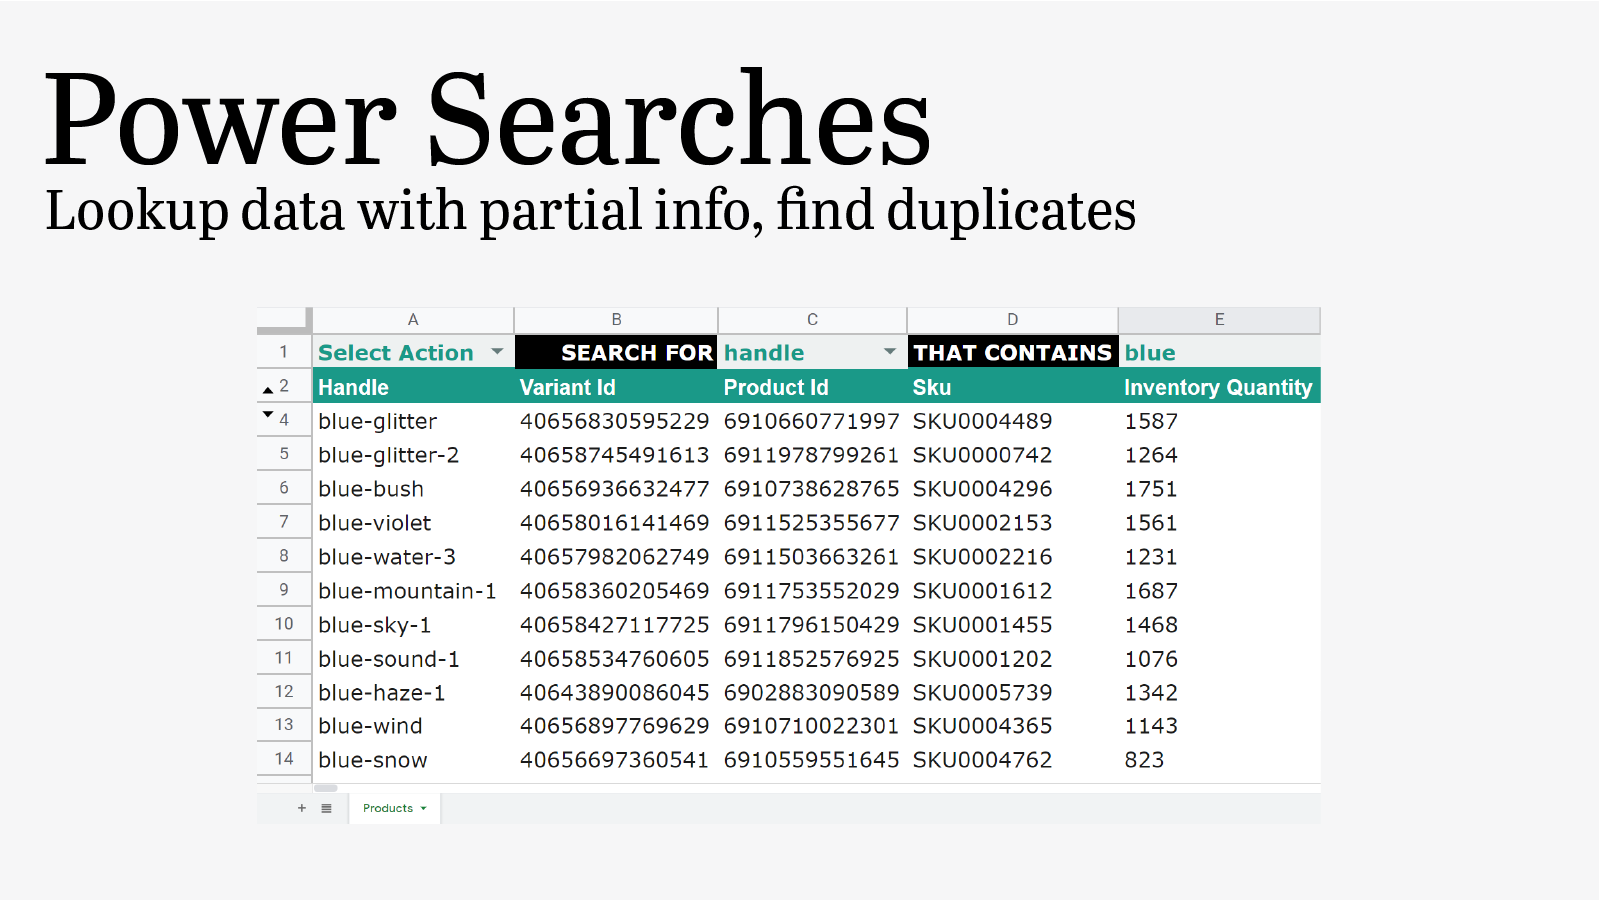 Lookup data with partial info and find duplicates